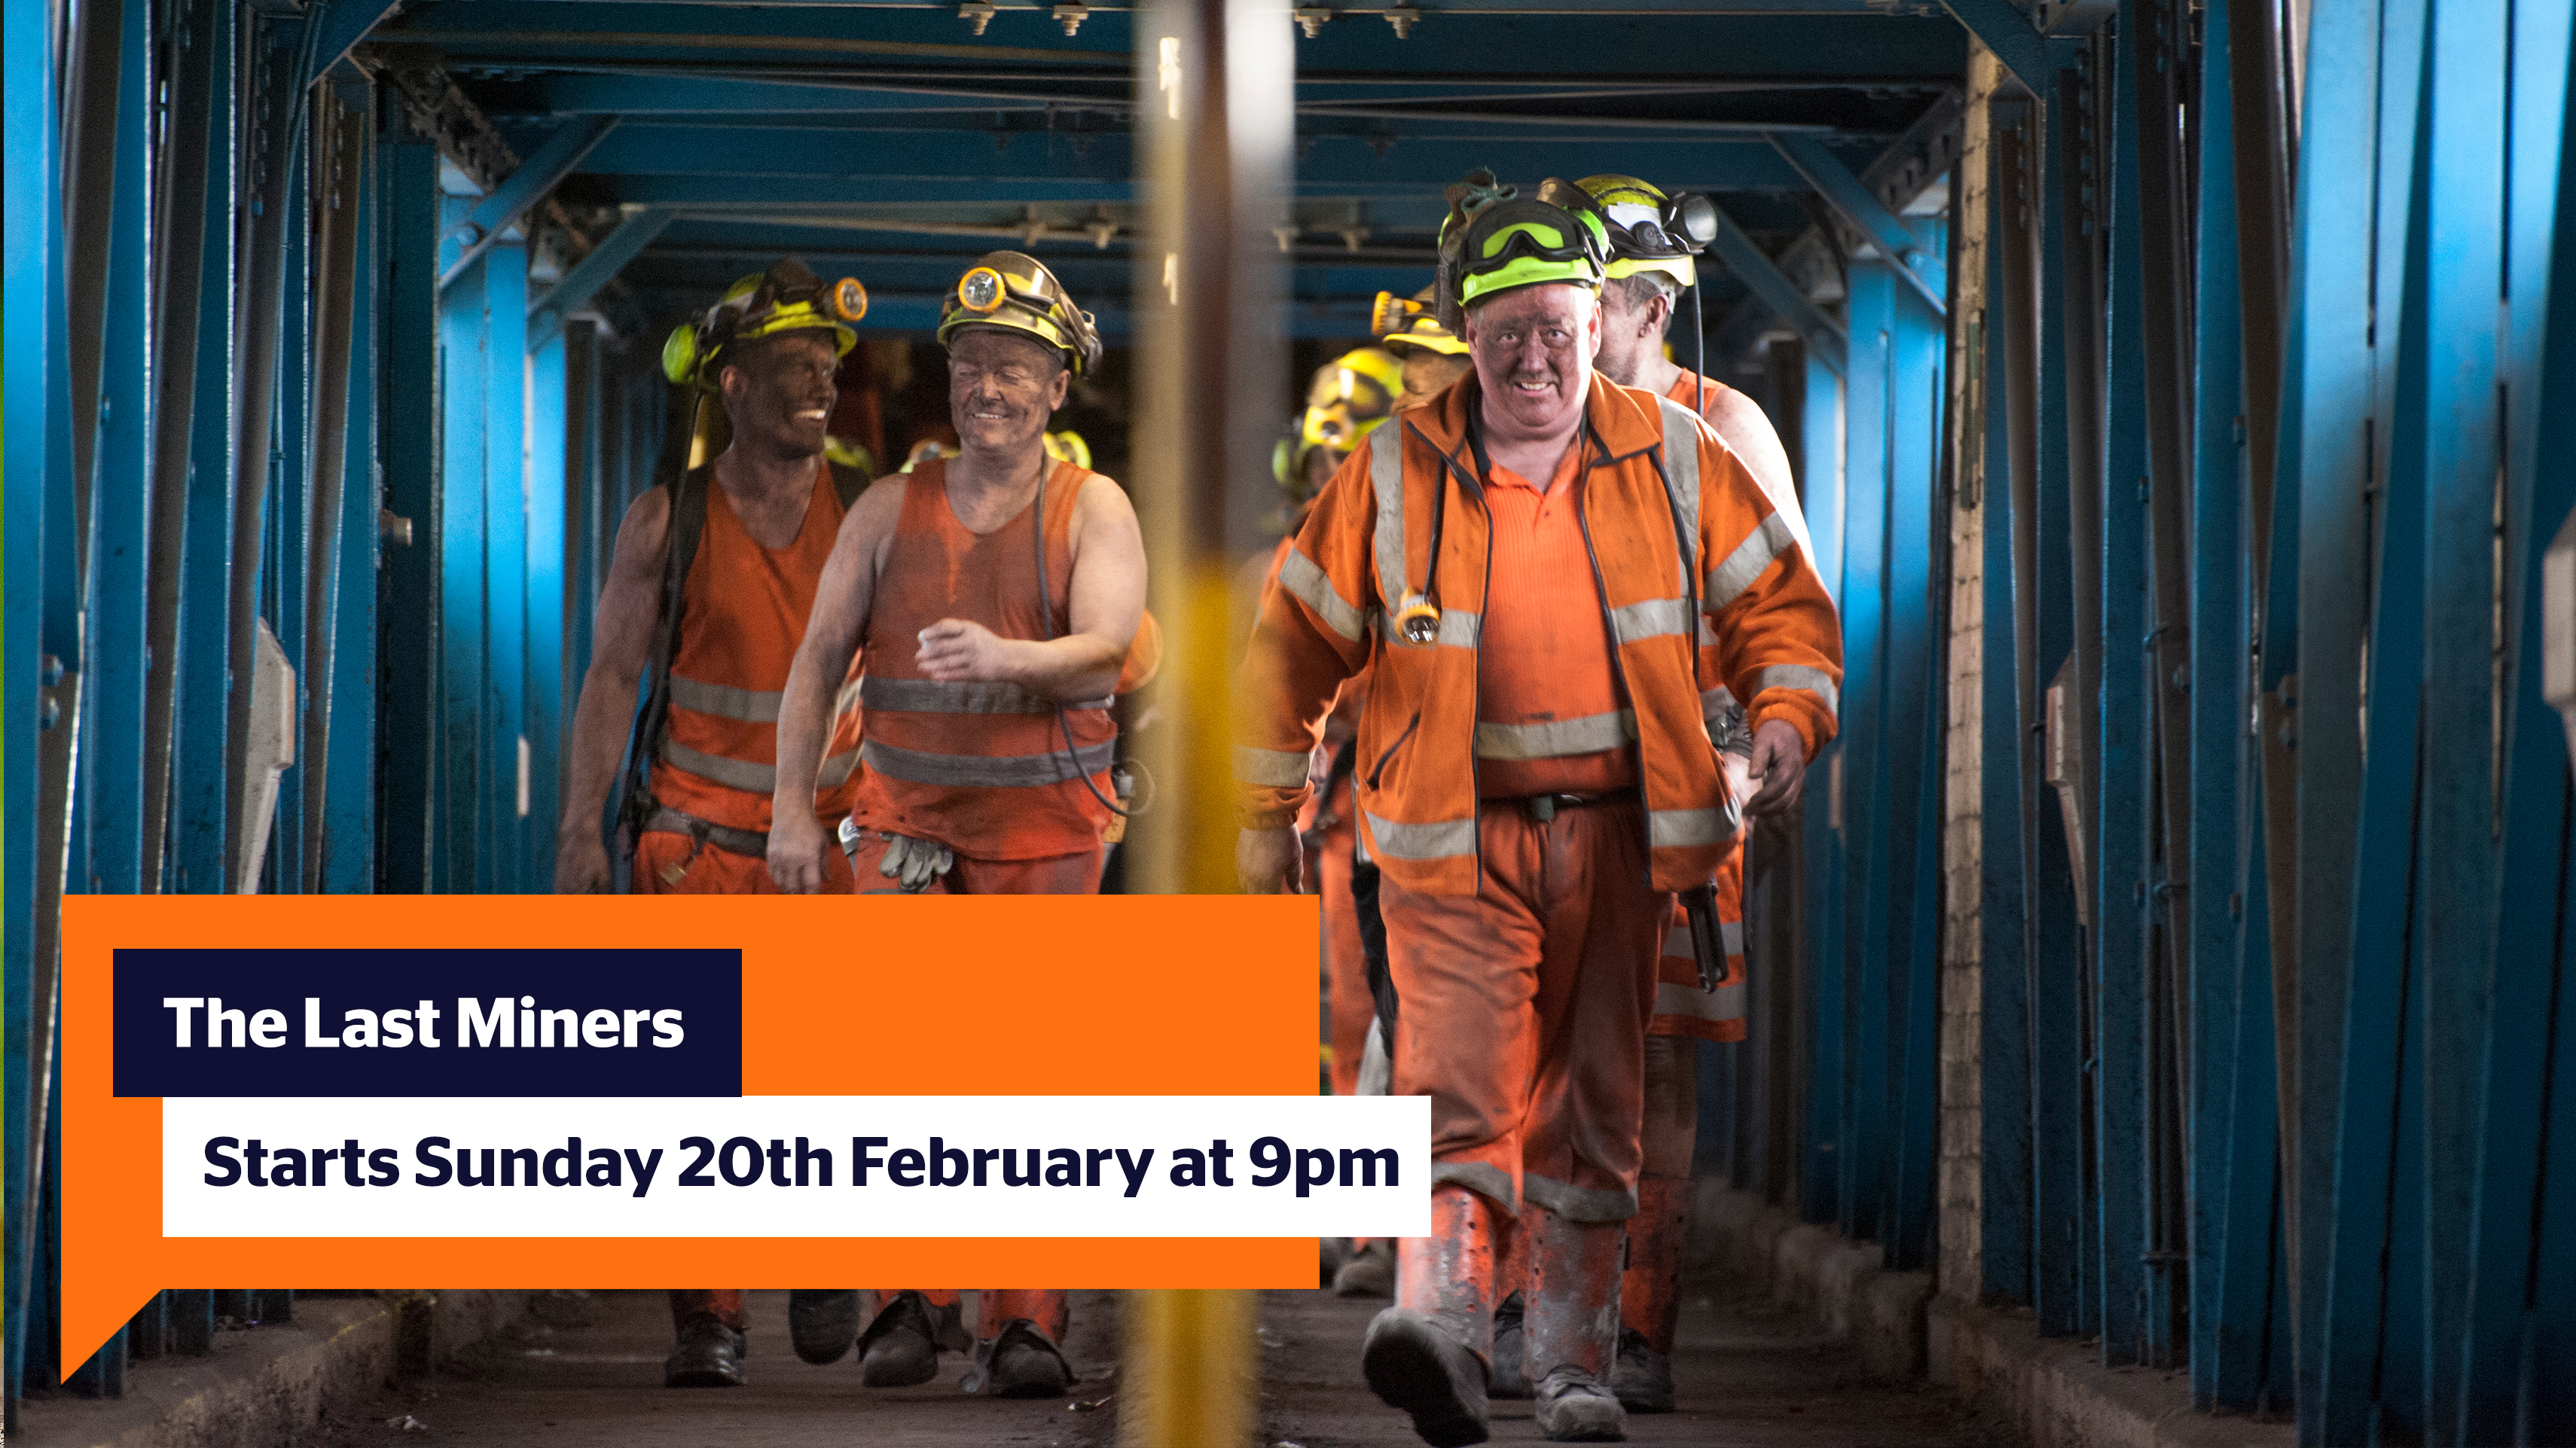 The Last Miners starts Sunday 20th February at 9pm